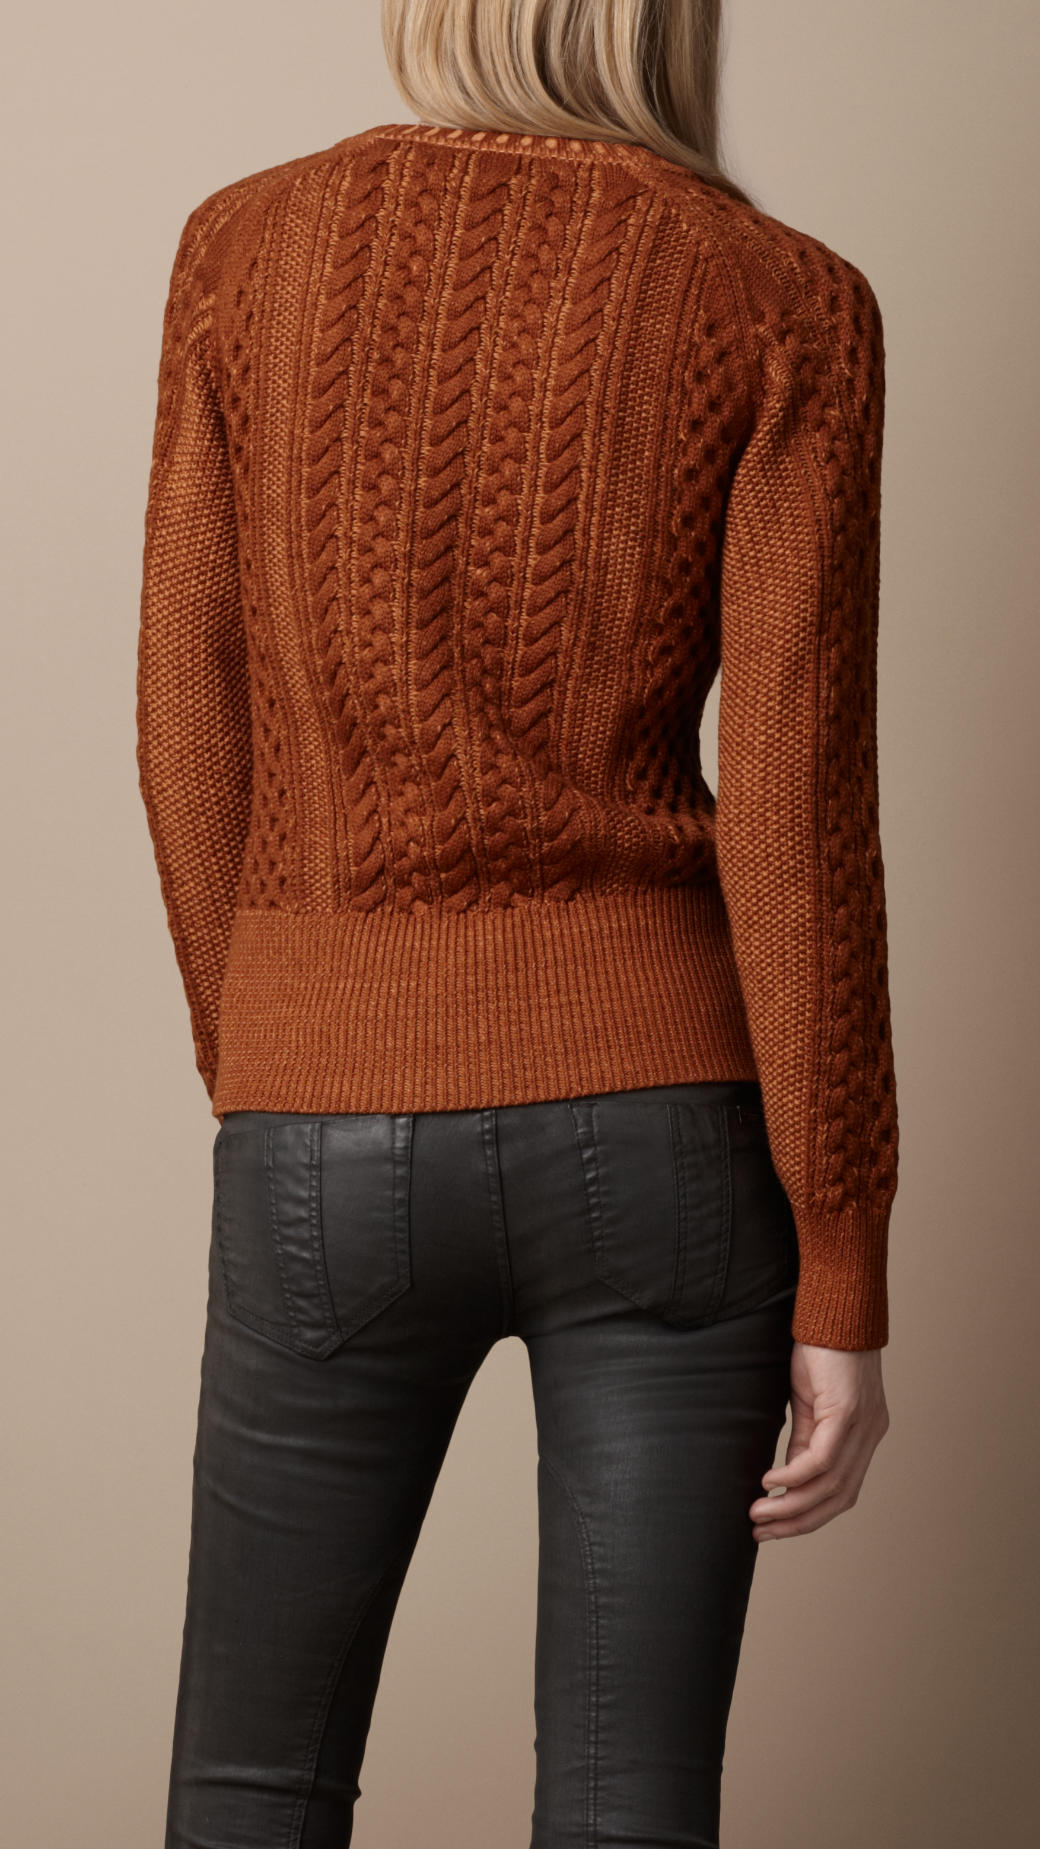 Burberry Brit Cable Knit Sweater in Brown - Lyst